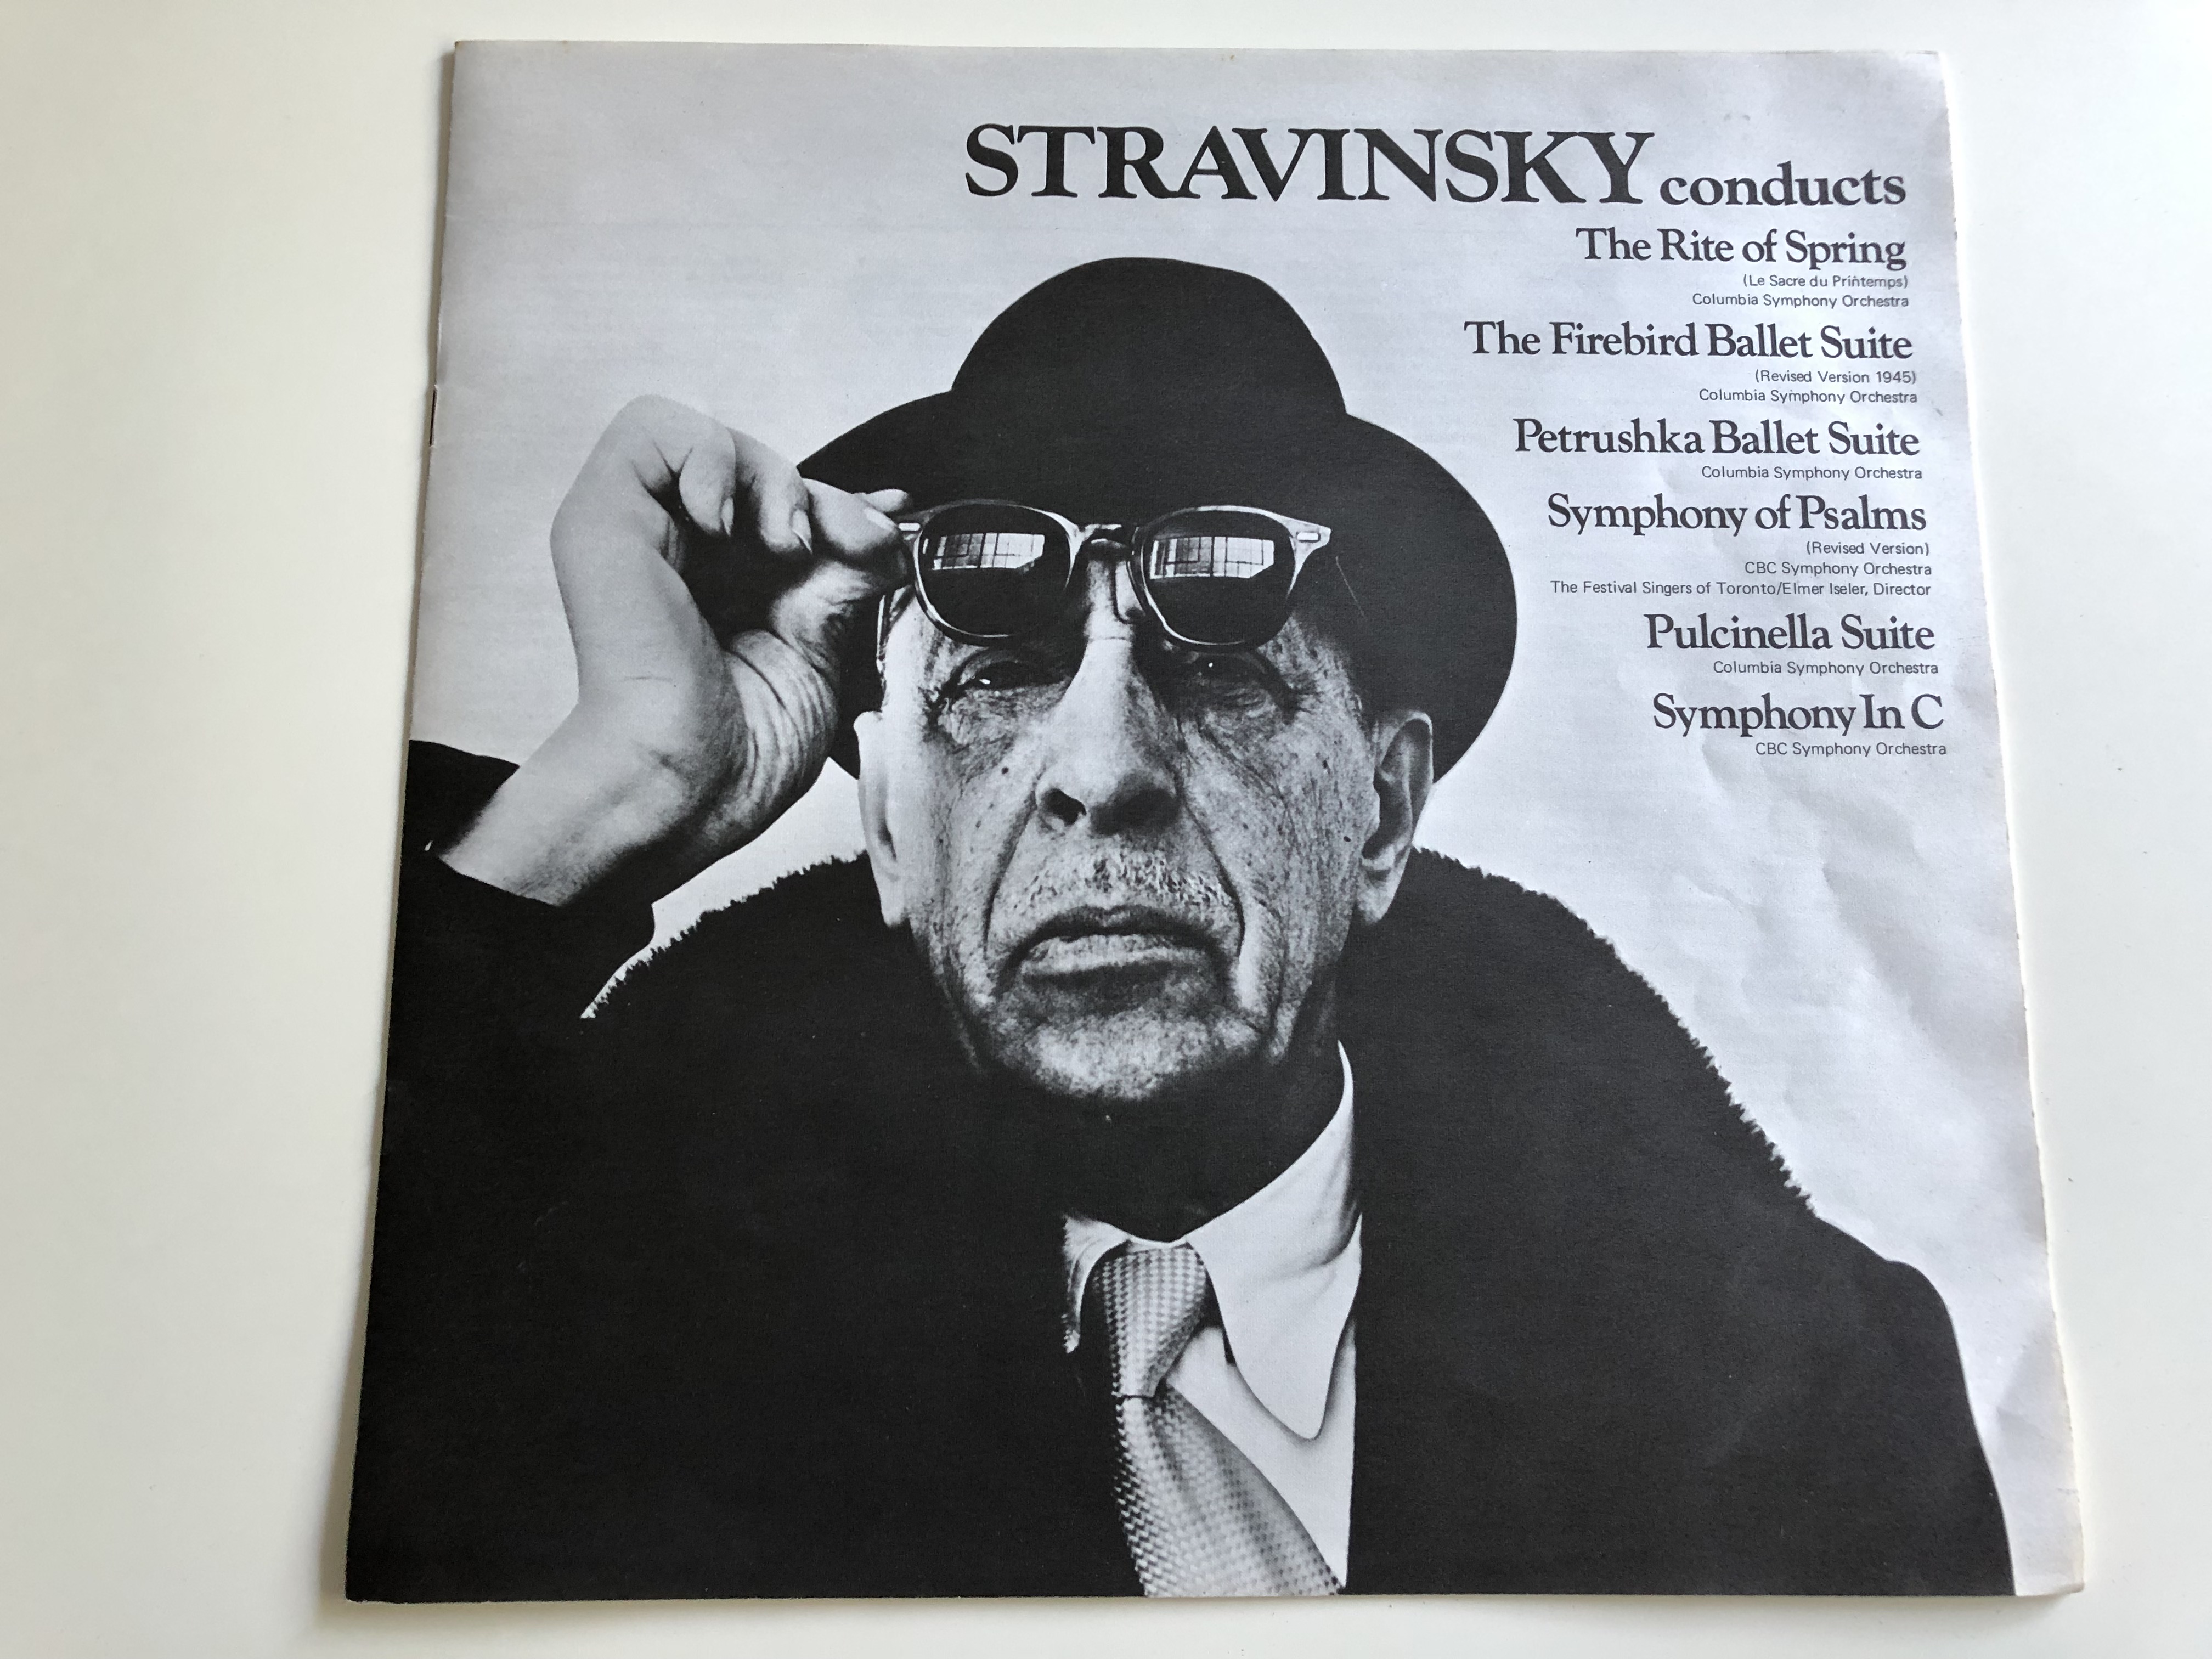 stravinsky-conducts-columbia-symphony-orchestra-cbc-symphony-orchestra-the-festival-singers-of-toronto-cbs-2x-lp-wm-39-3-.jpg